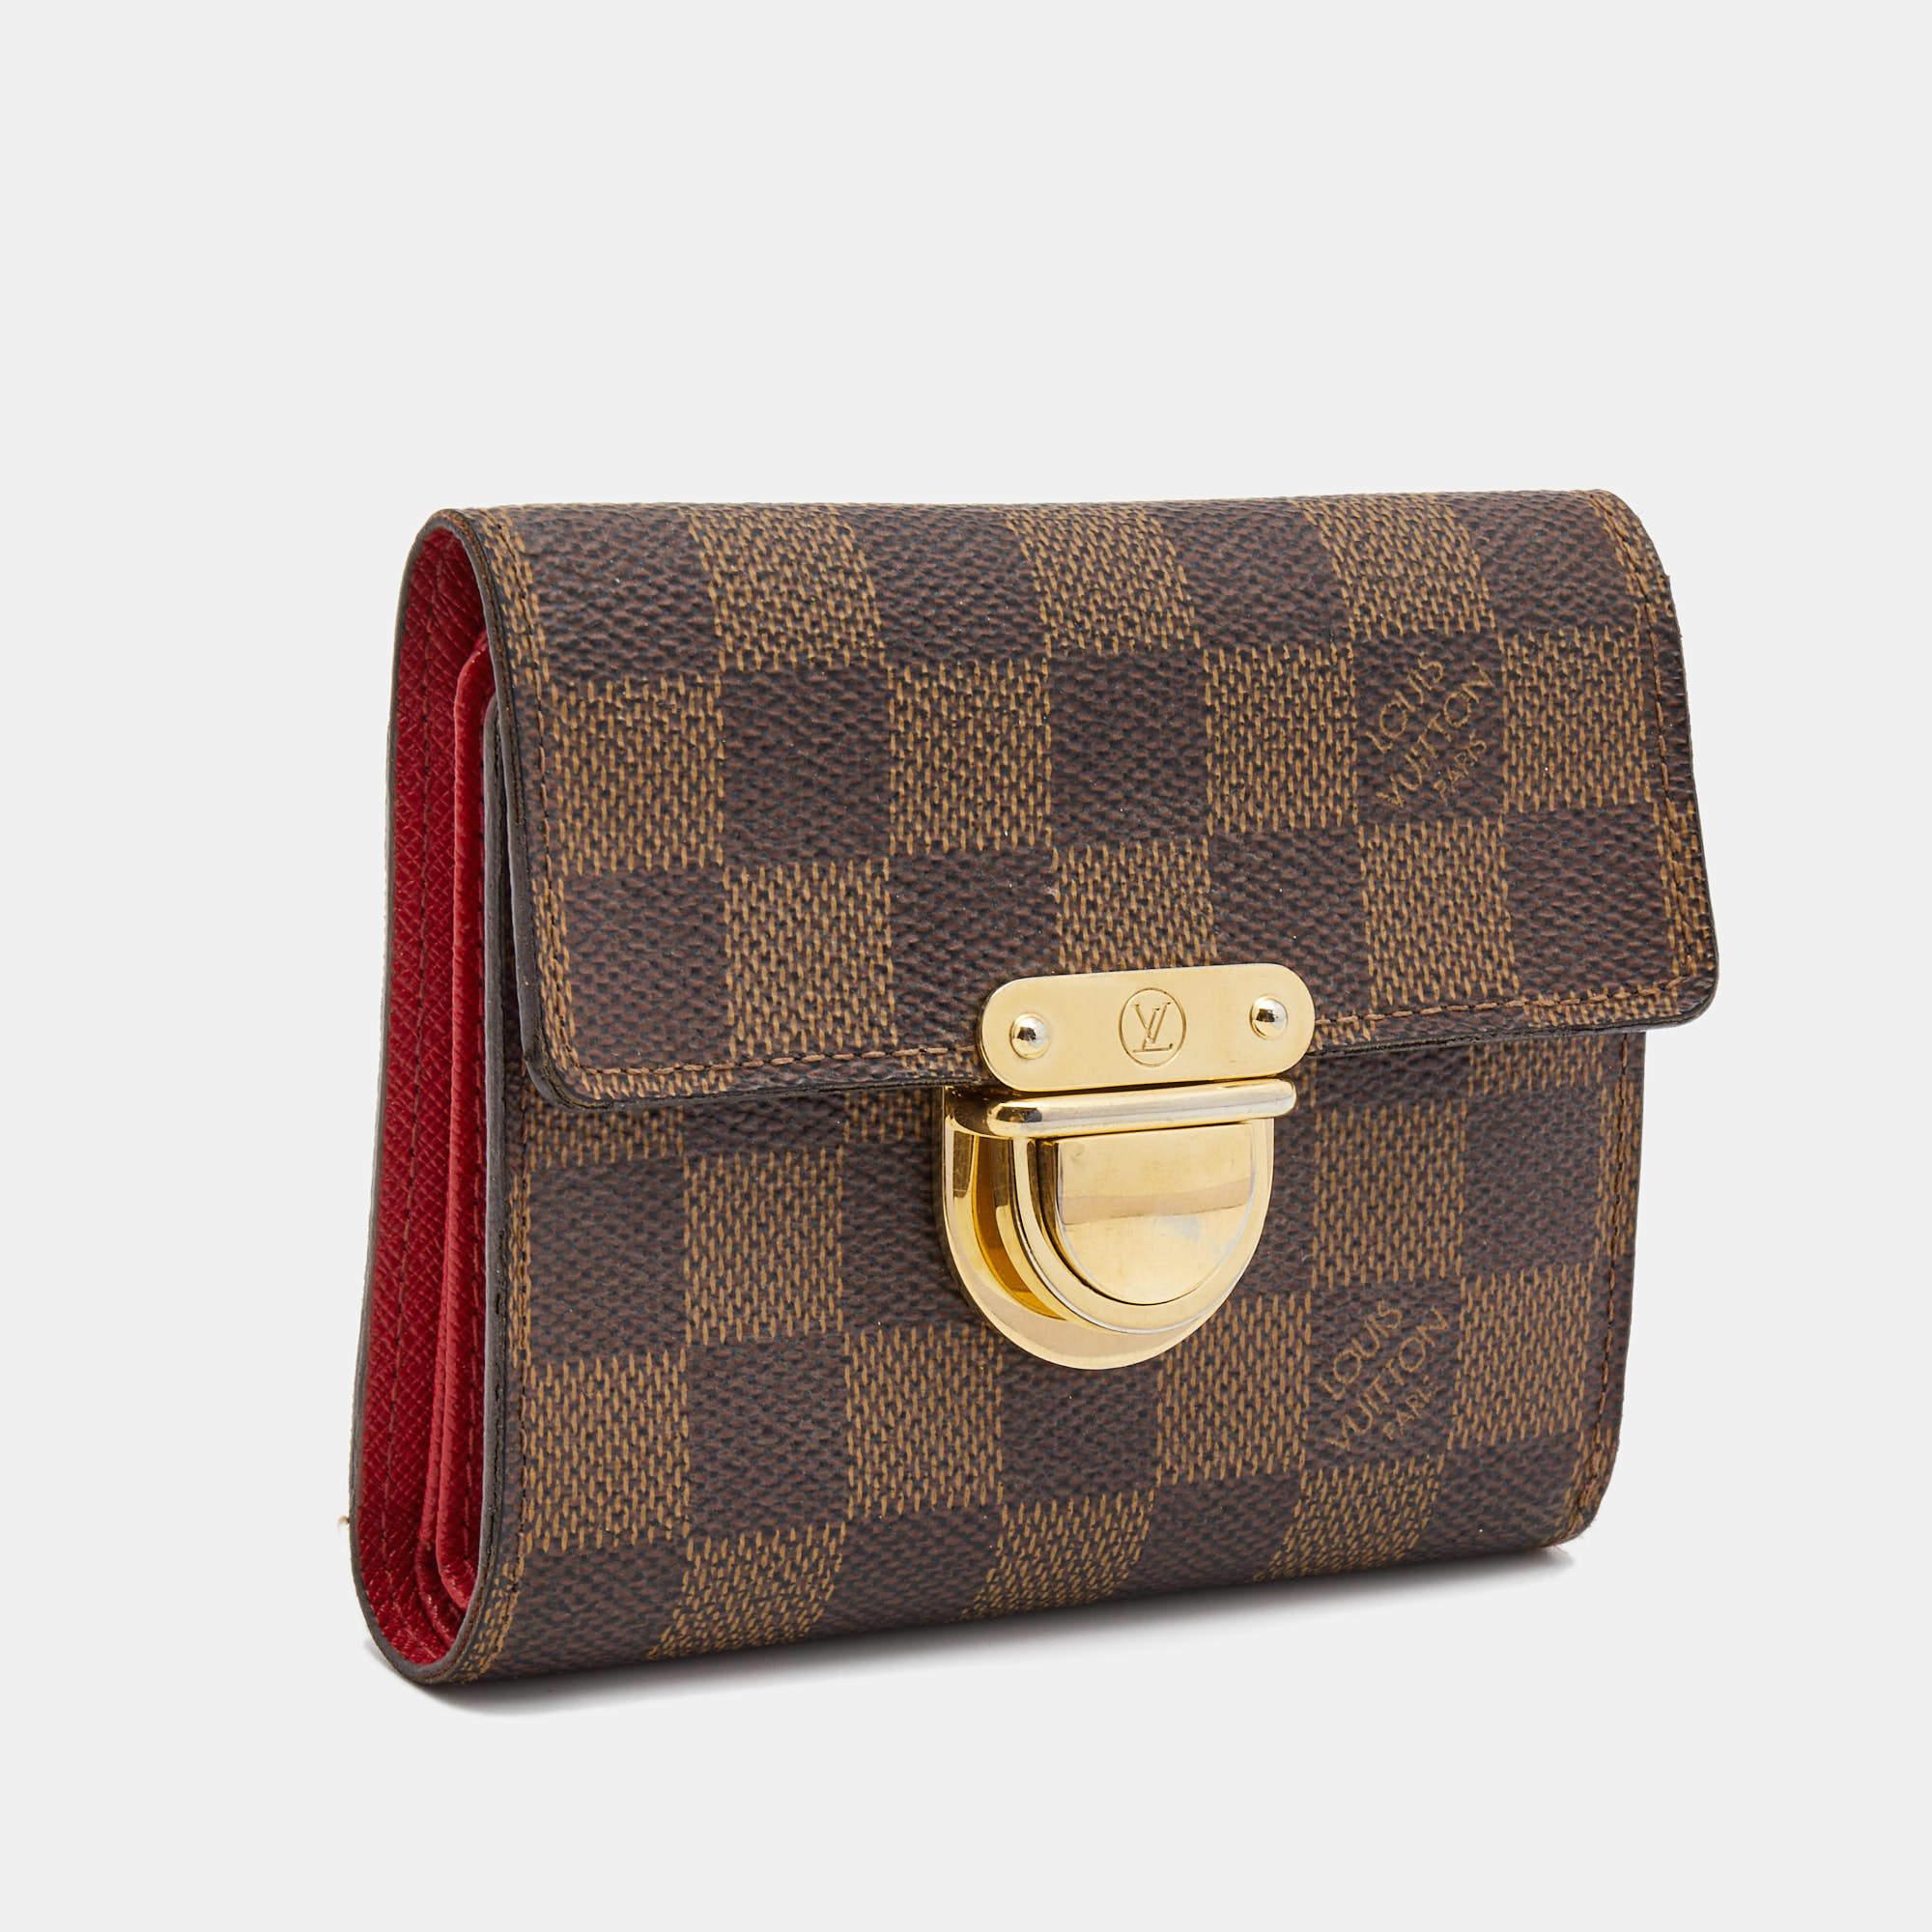 This Louis Vuitton wallet designed is a luxurious accessory that will prove to be super functional. It is made using Damier Ebene canvas for the exterior and unveils a well-organized interior.

